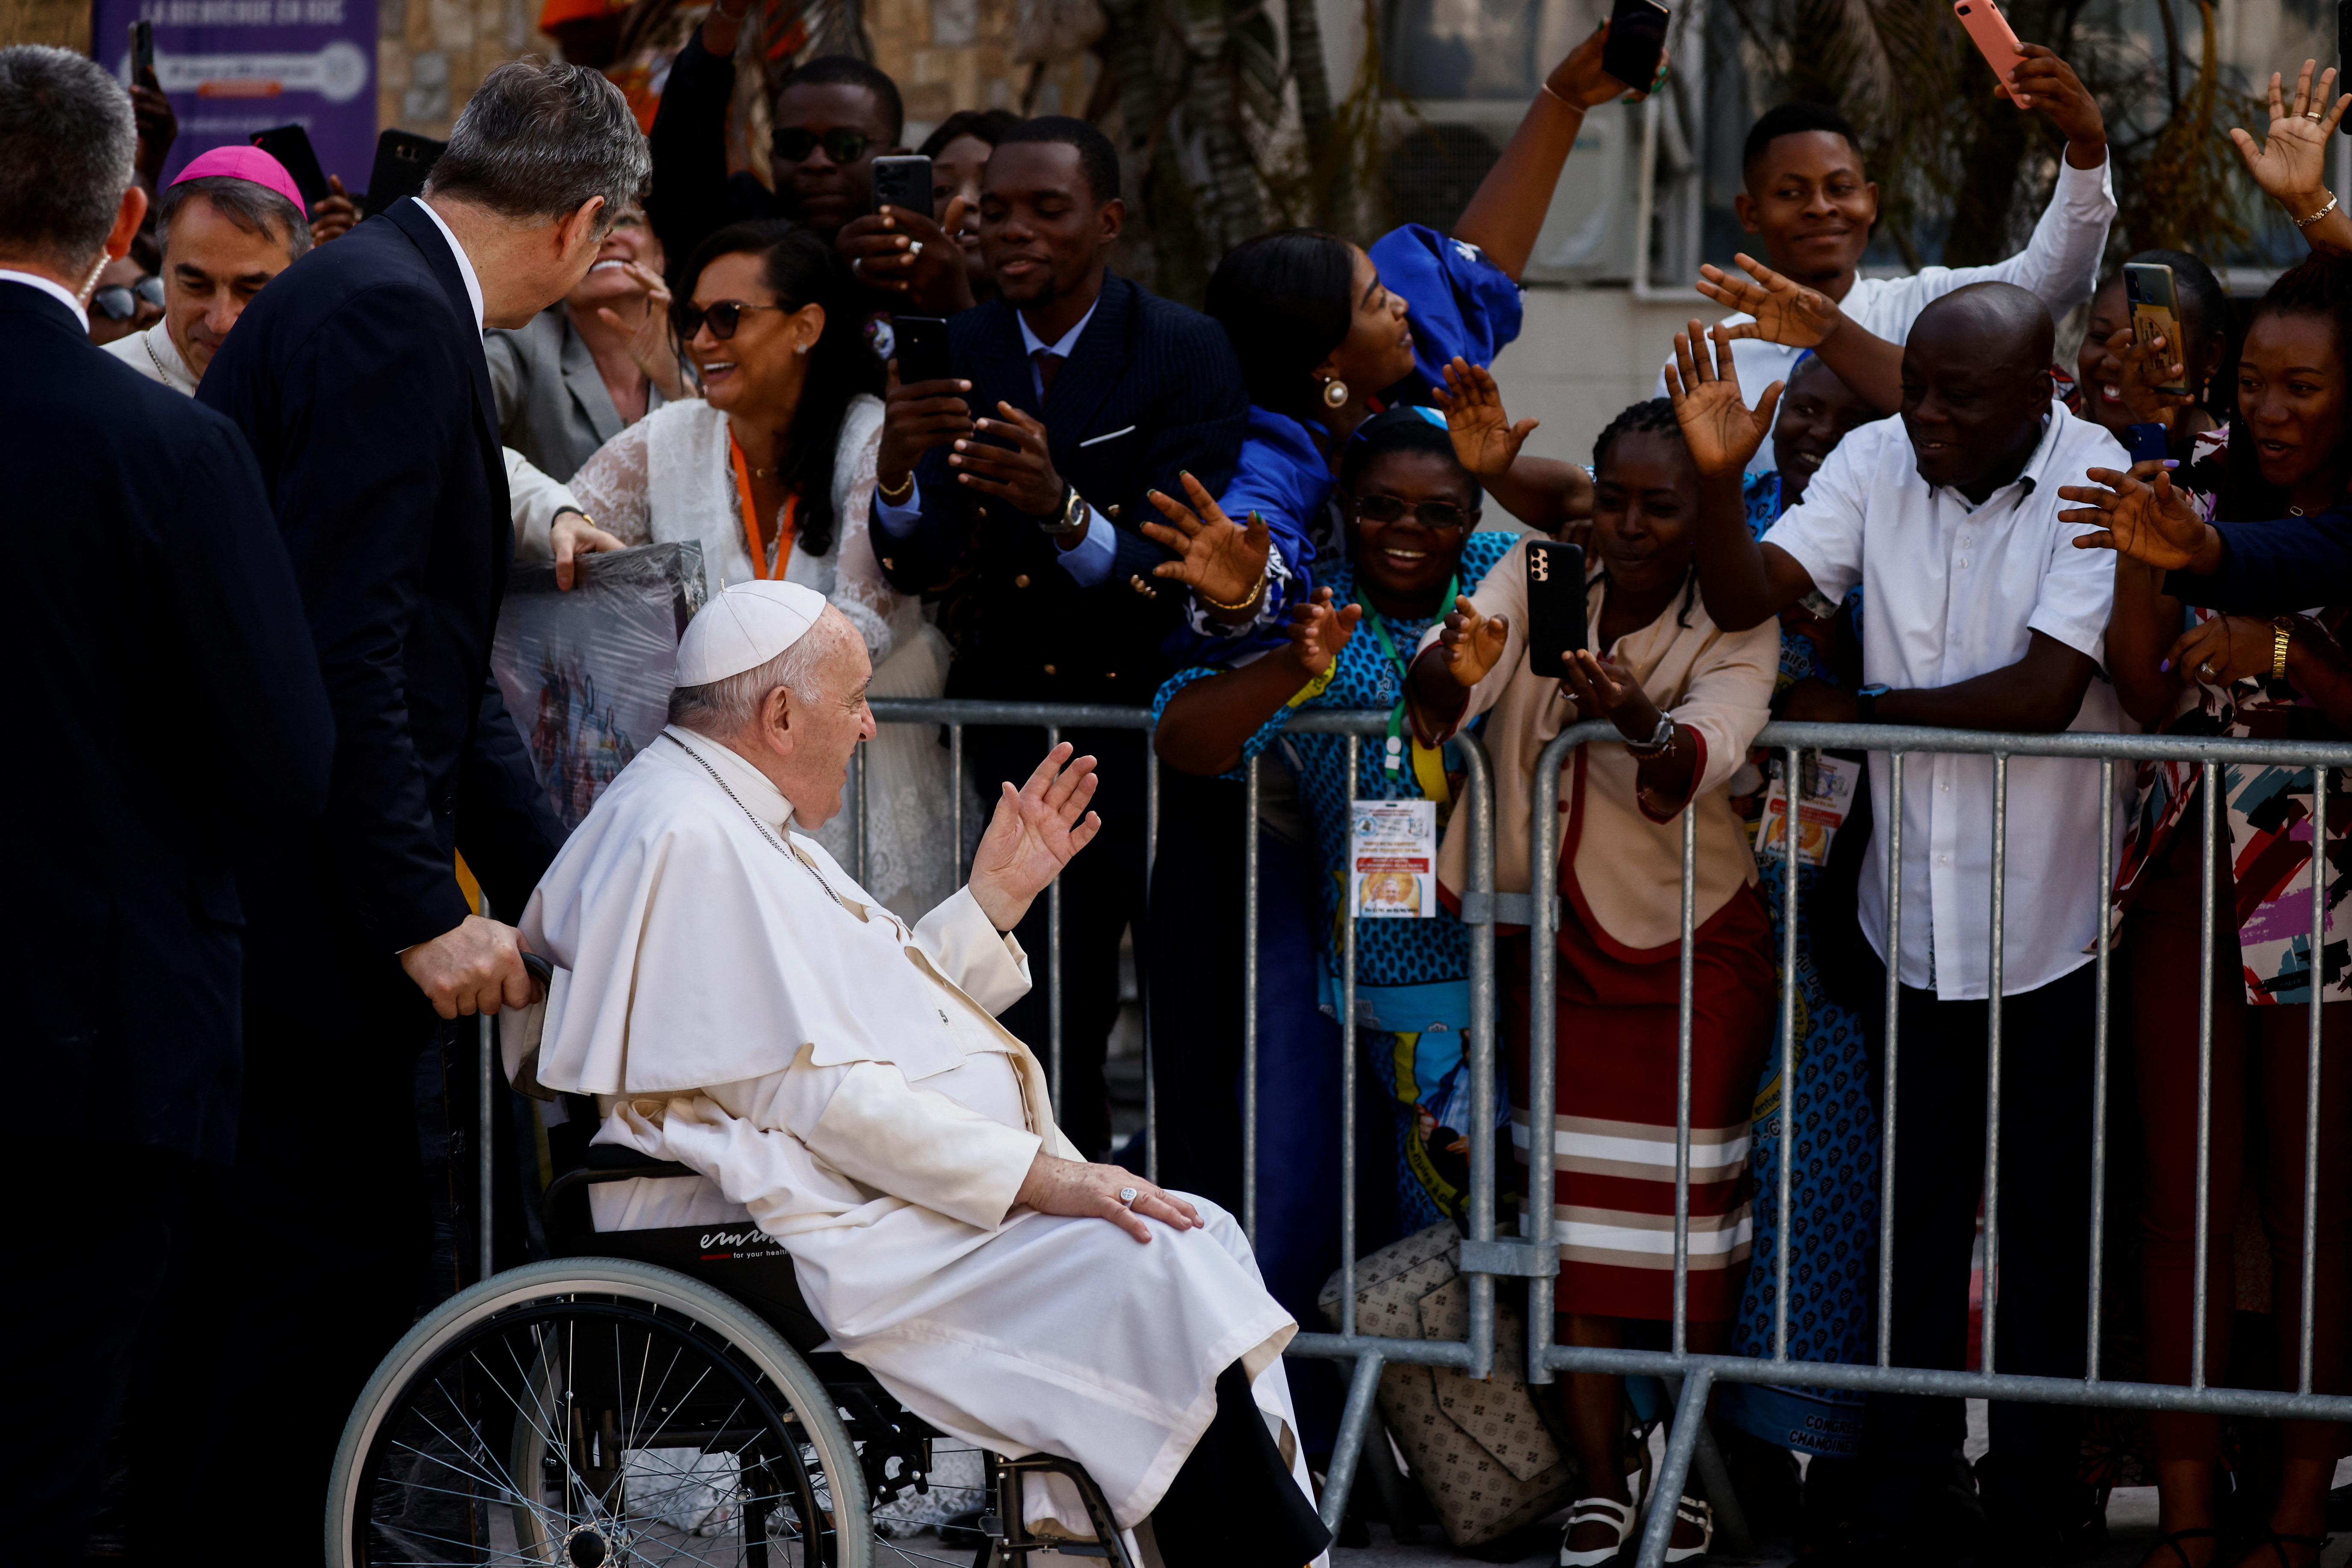 Pope Francis visits Congo